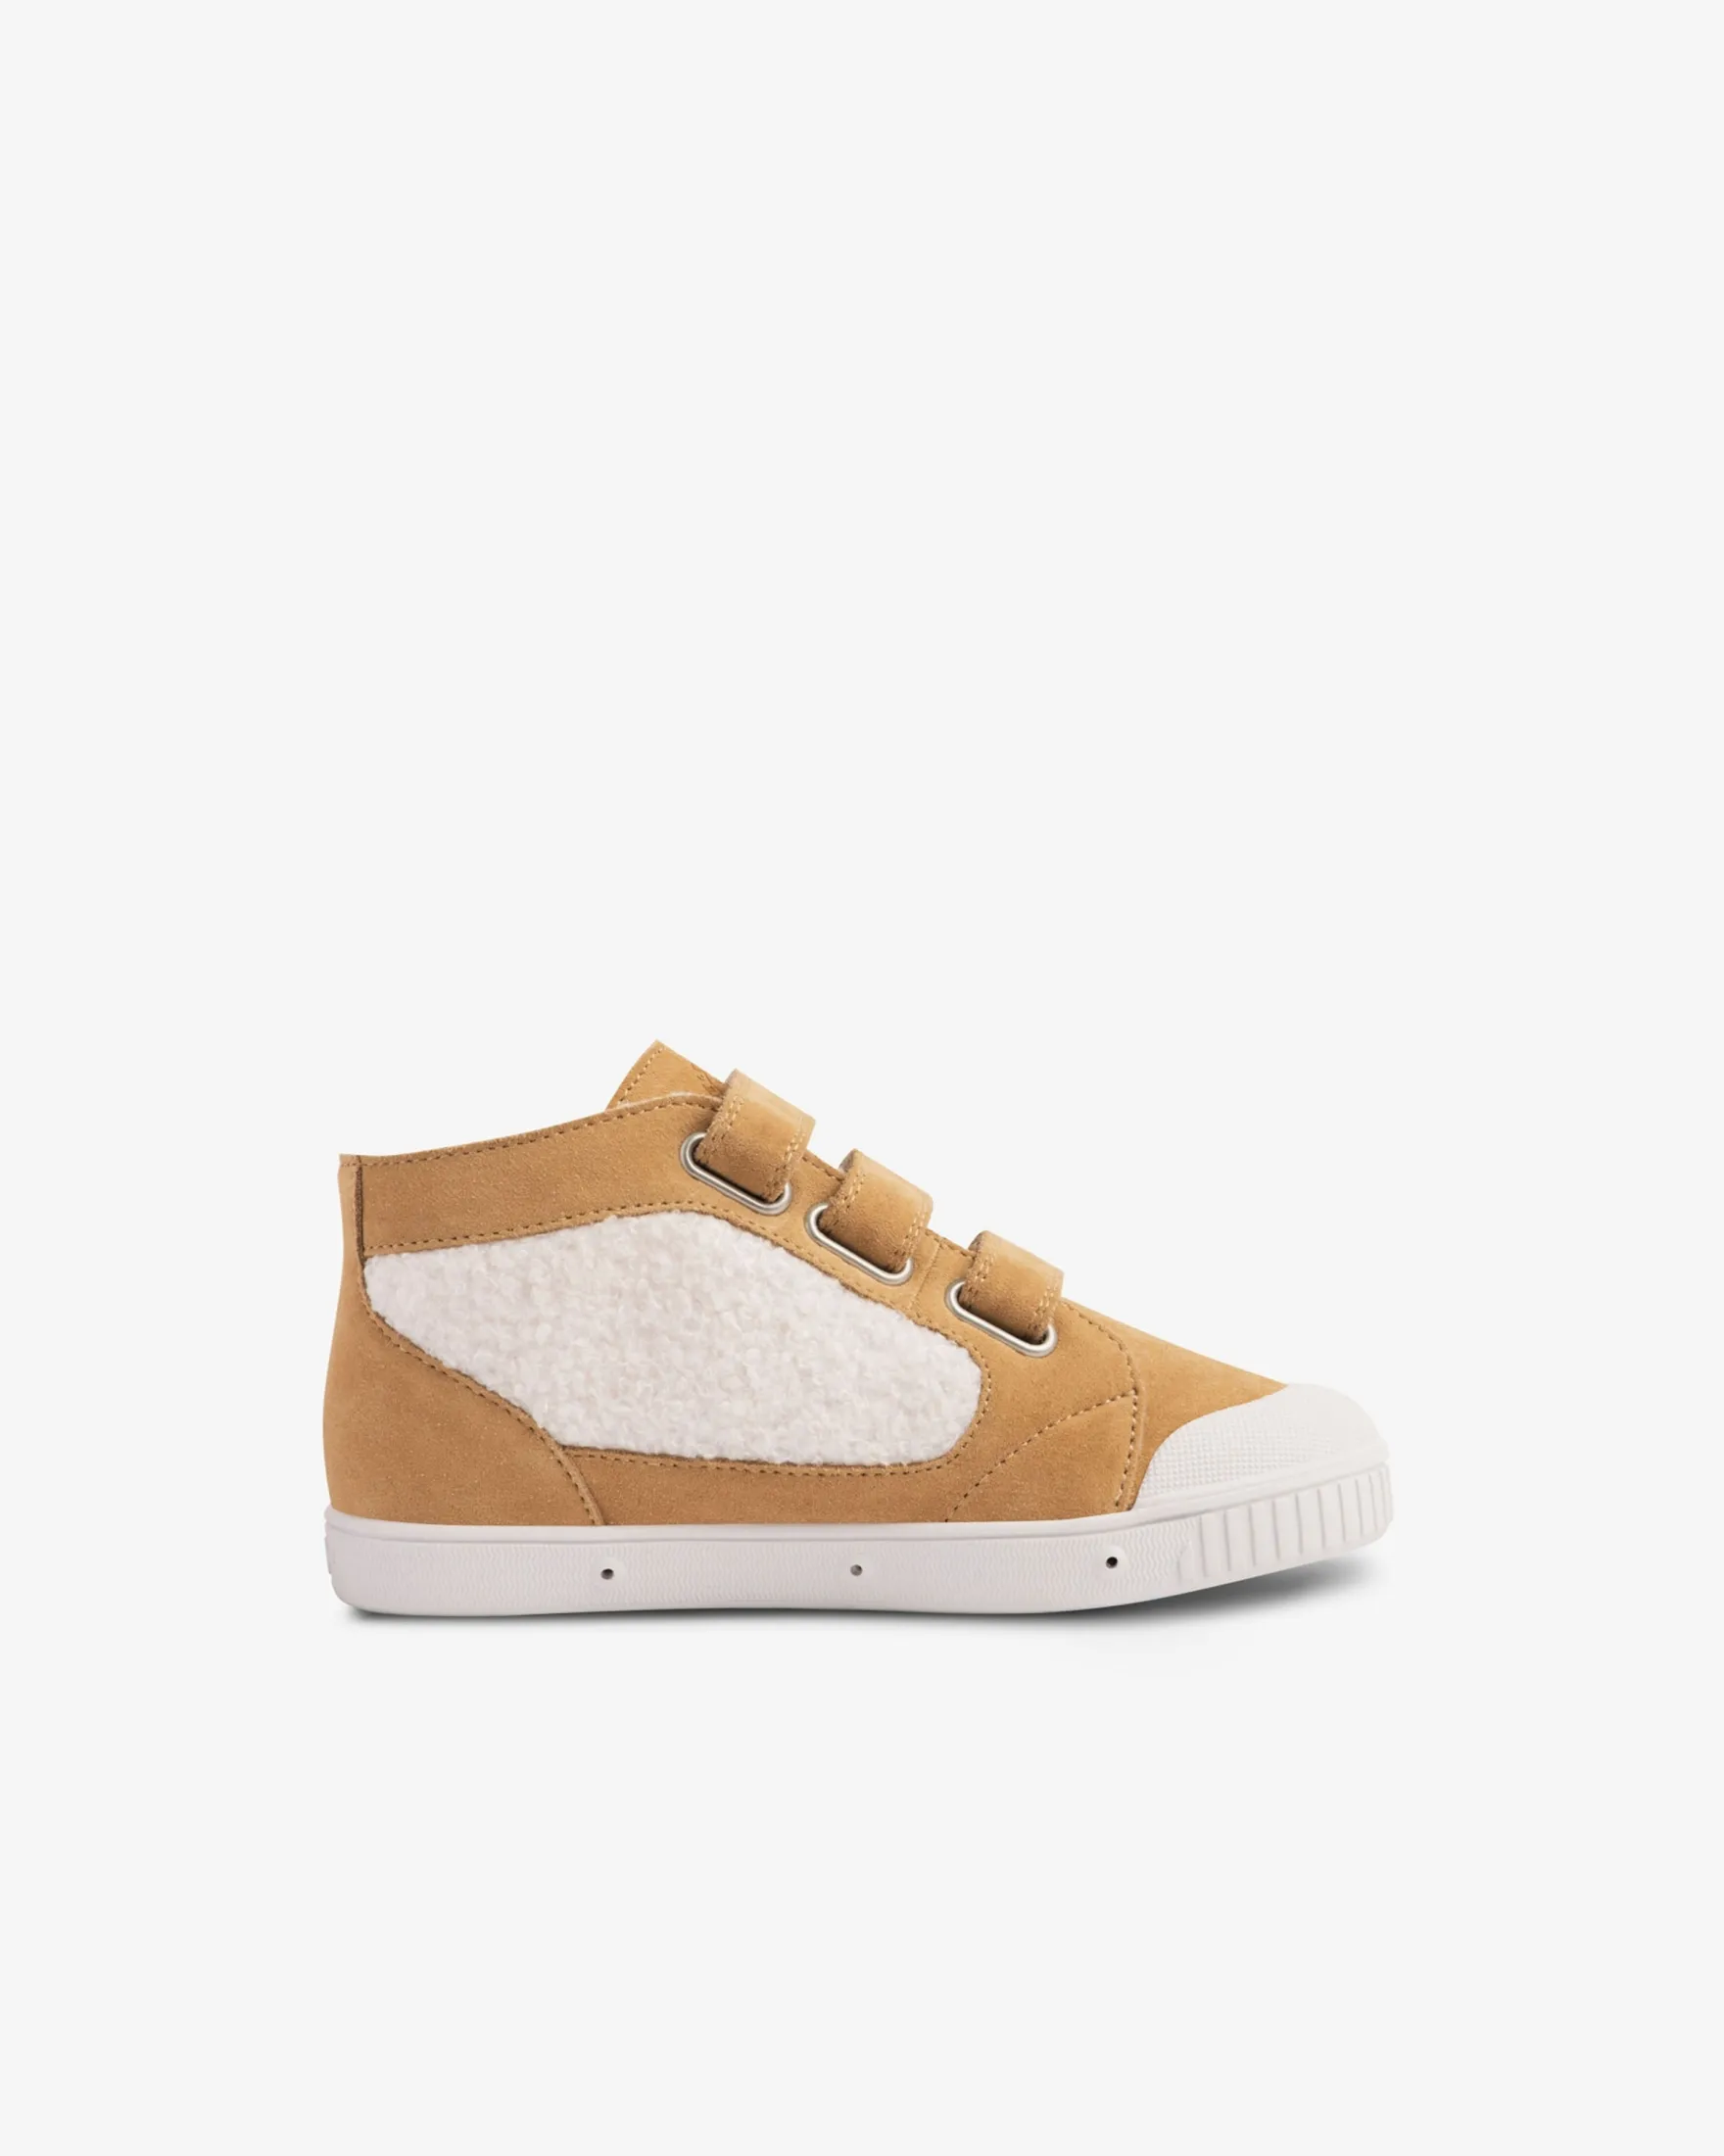 Children's high top leather trainers